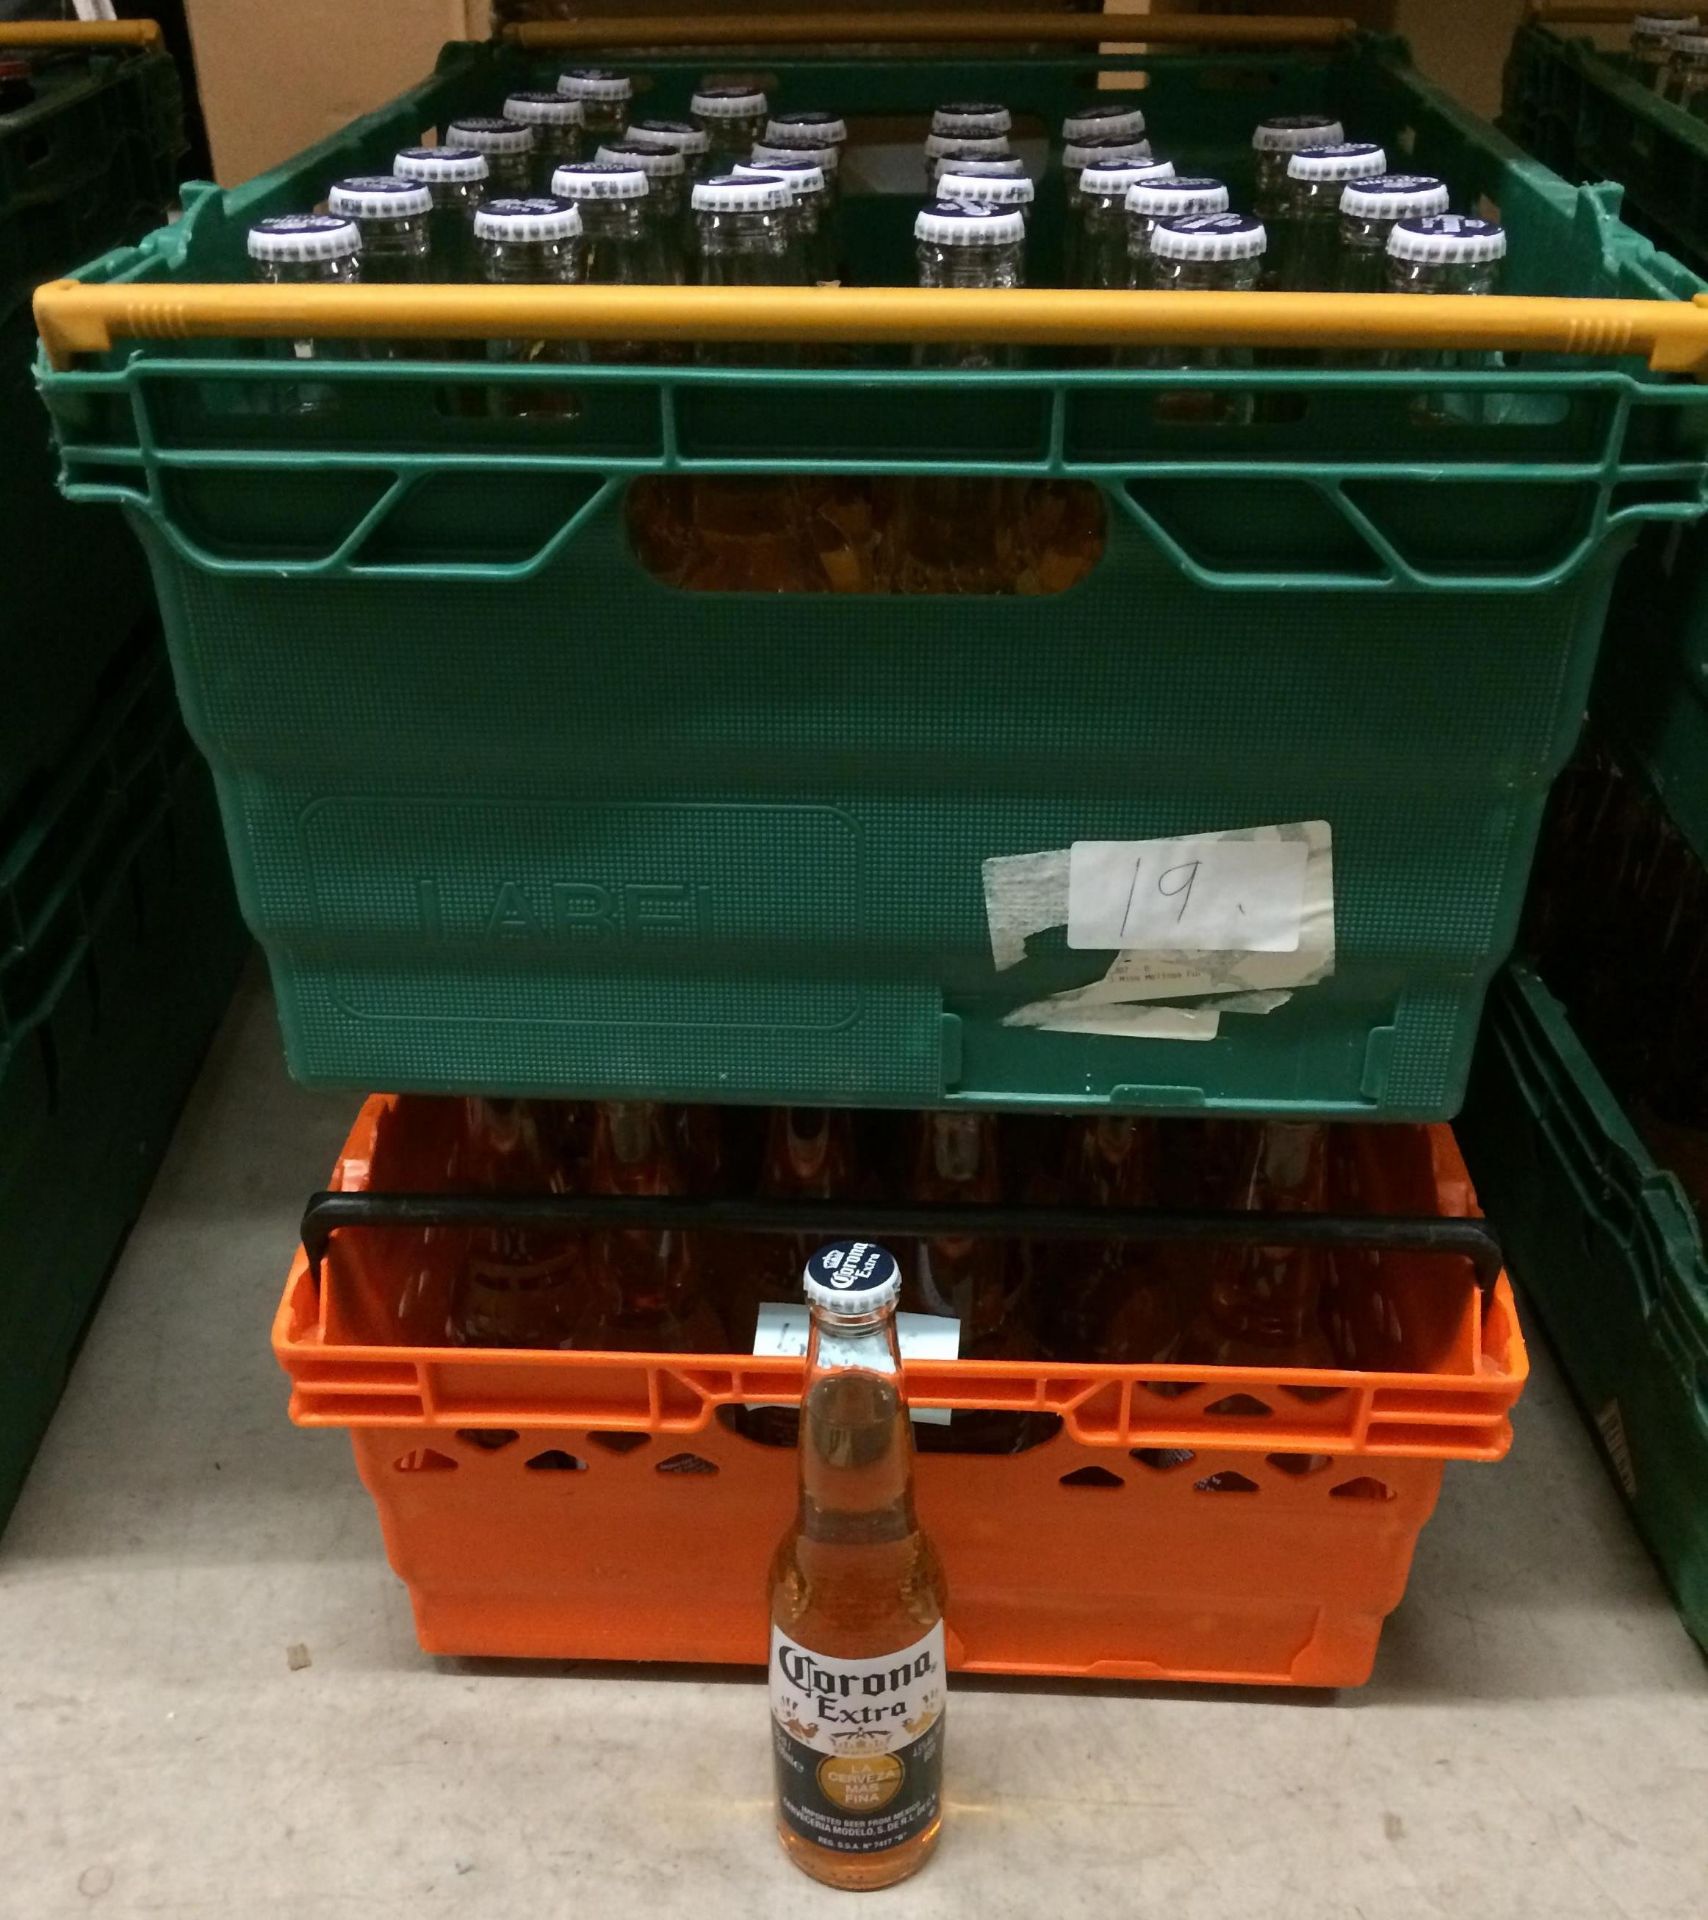 80 x 330ml bottles of Corona extra (plastic crate not included)